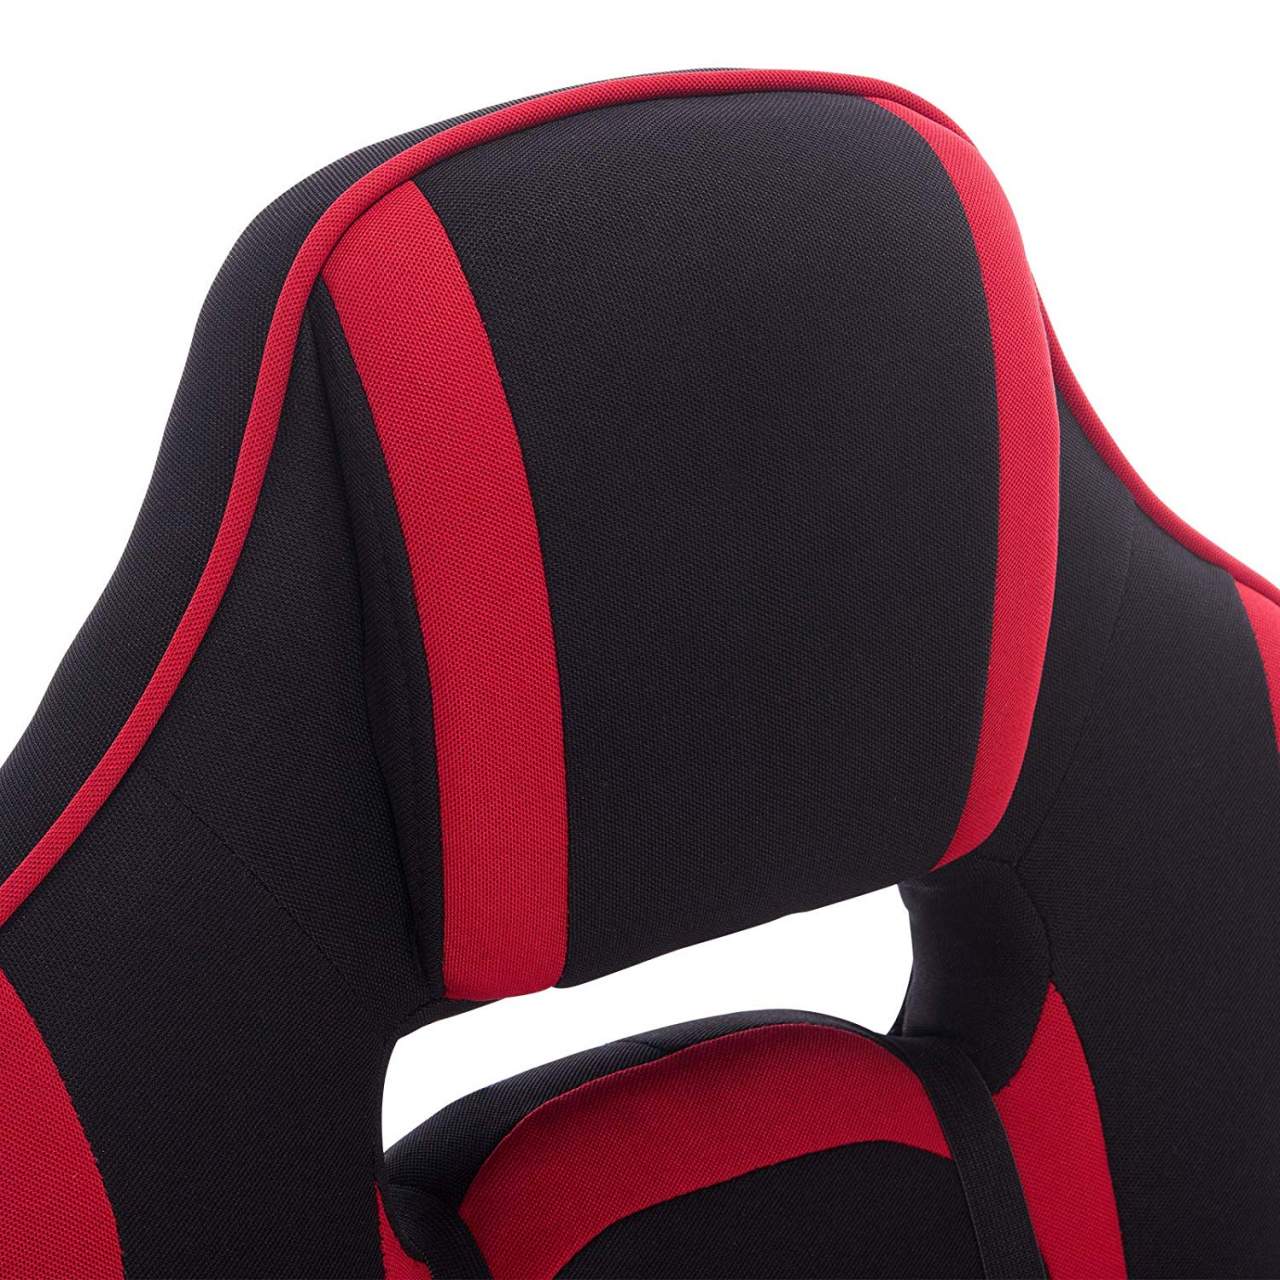 Racing Chair Swivel Computer Desk Chair Fabric Seat With 170 Tilt